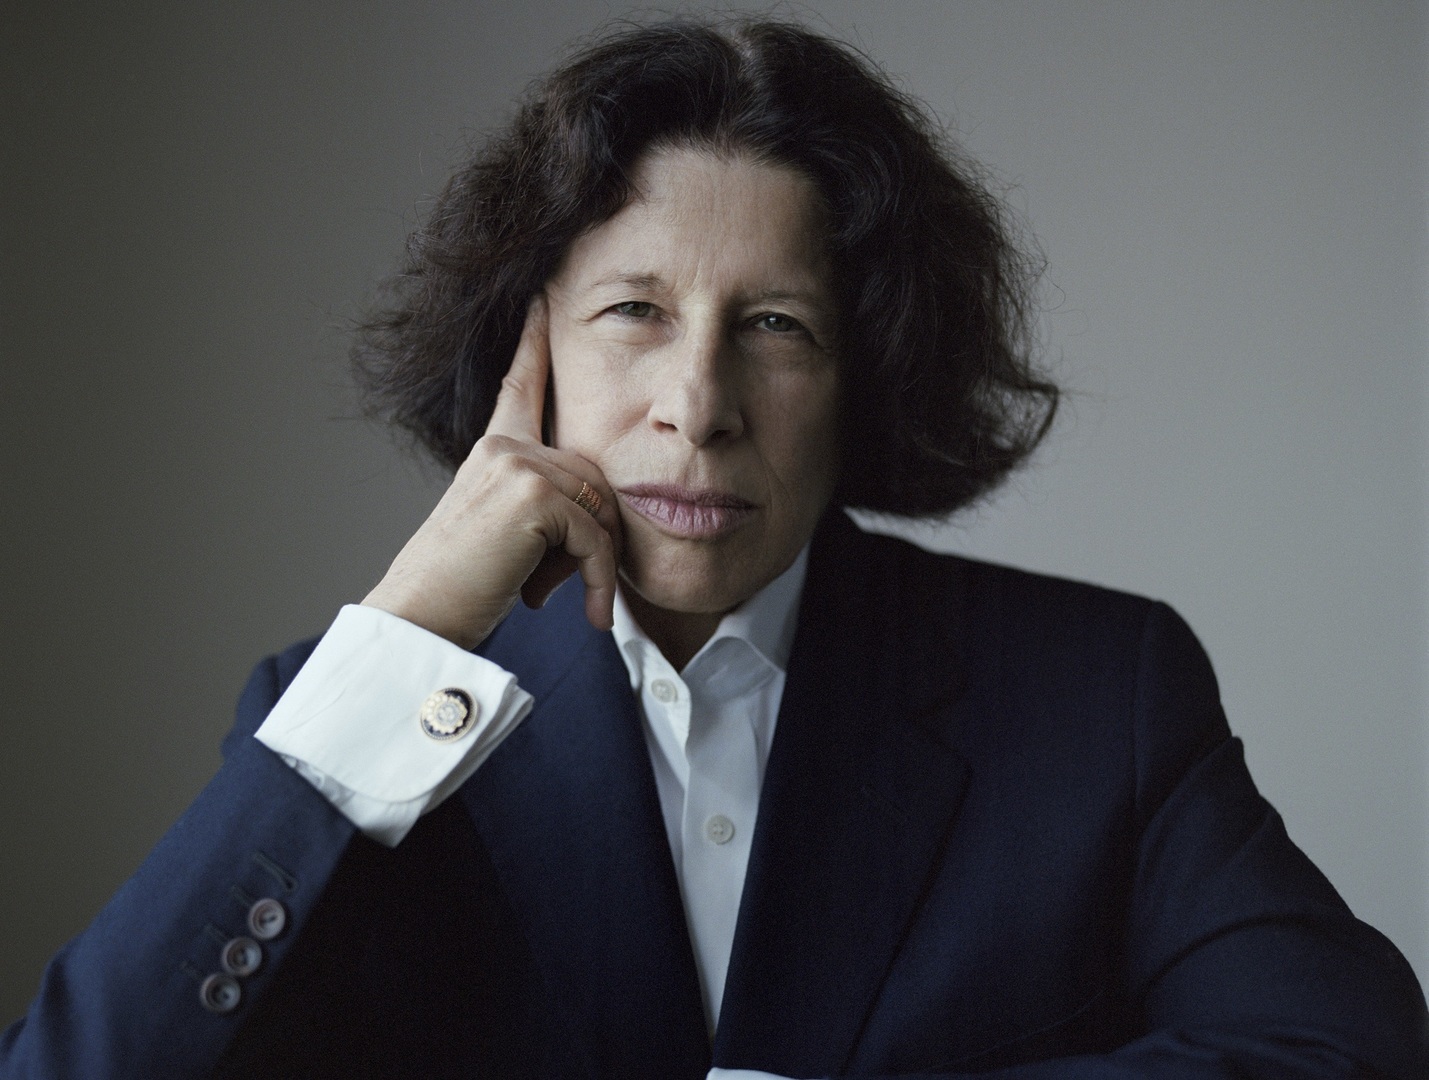 MIAC Live: An Evening with Fran Lebowitz, Erie, Pennsylvania, United States